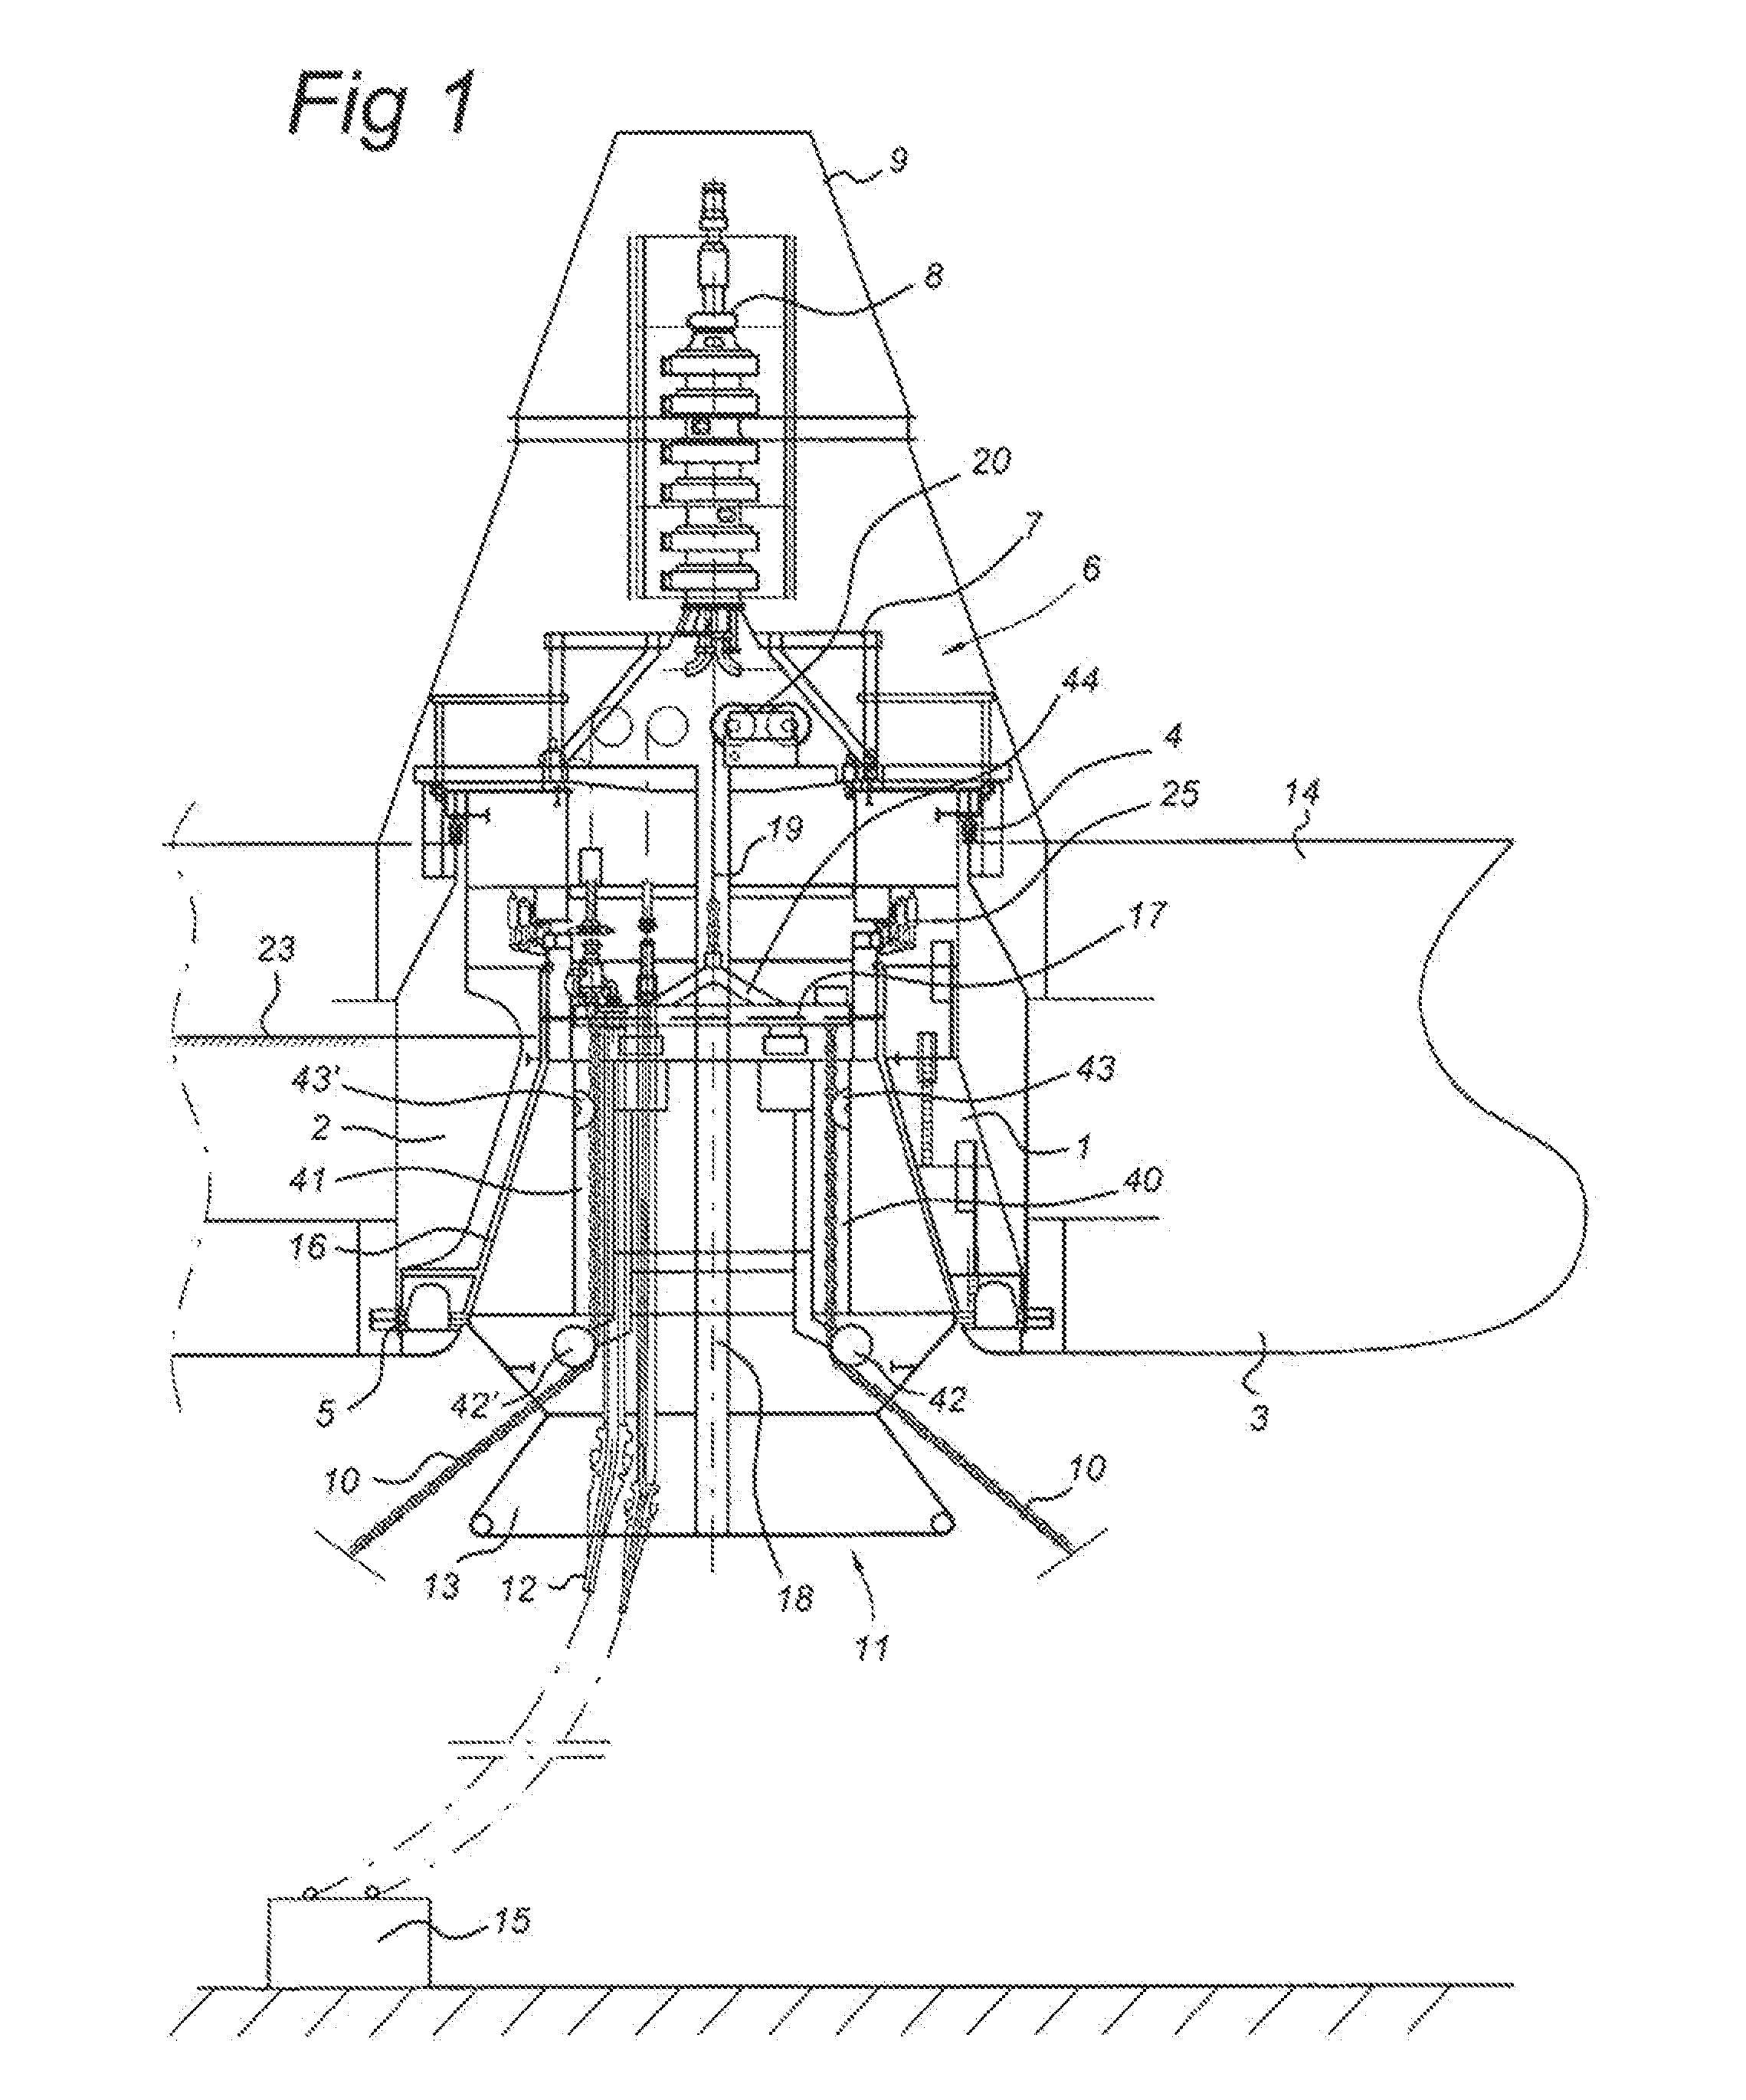 Mooring system with decoupled mooring lines and/or riser system